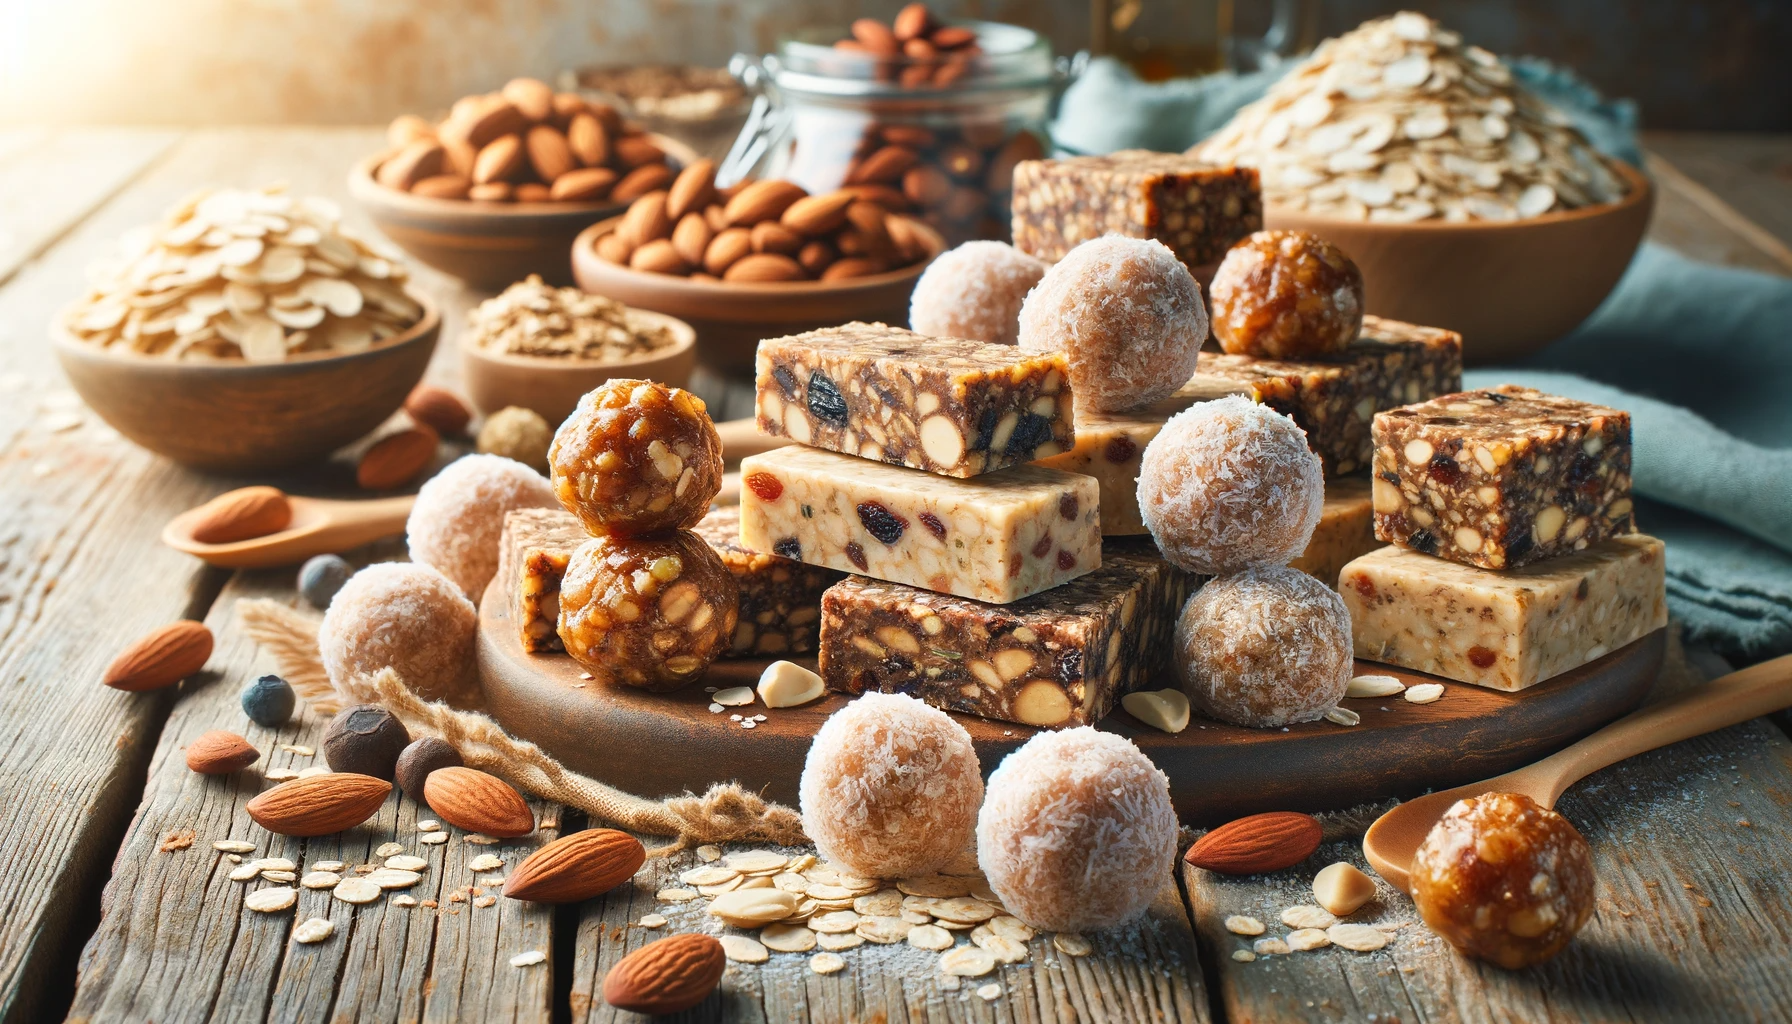 The image depicts a selection of no-bake protein bars and energy bites, arranged on a rustic wooden surface. The bars are chunky with visible nuts and fruits, while the energy bites are round with a coconut coating. Ingredients like oats and almonds are scattered around, enhancing the natural, wholesome look of these gluten-free snacks.